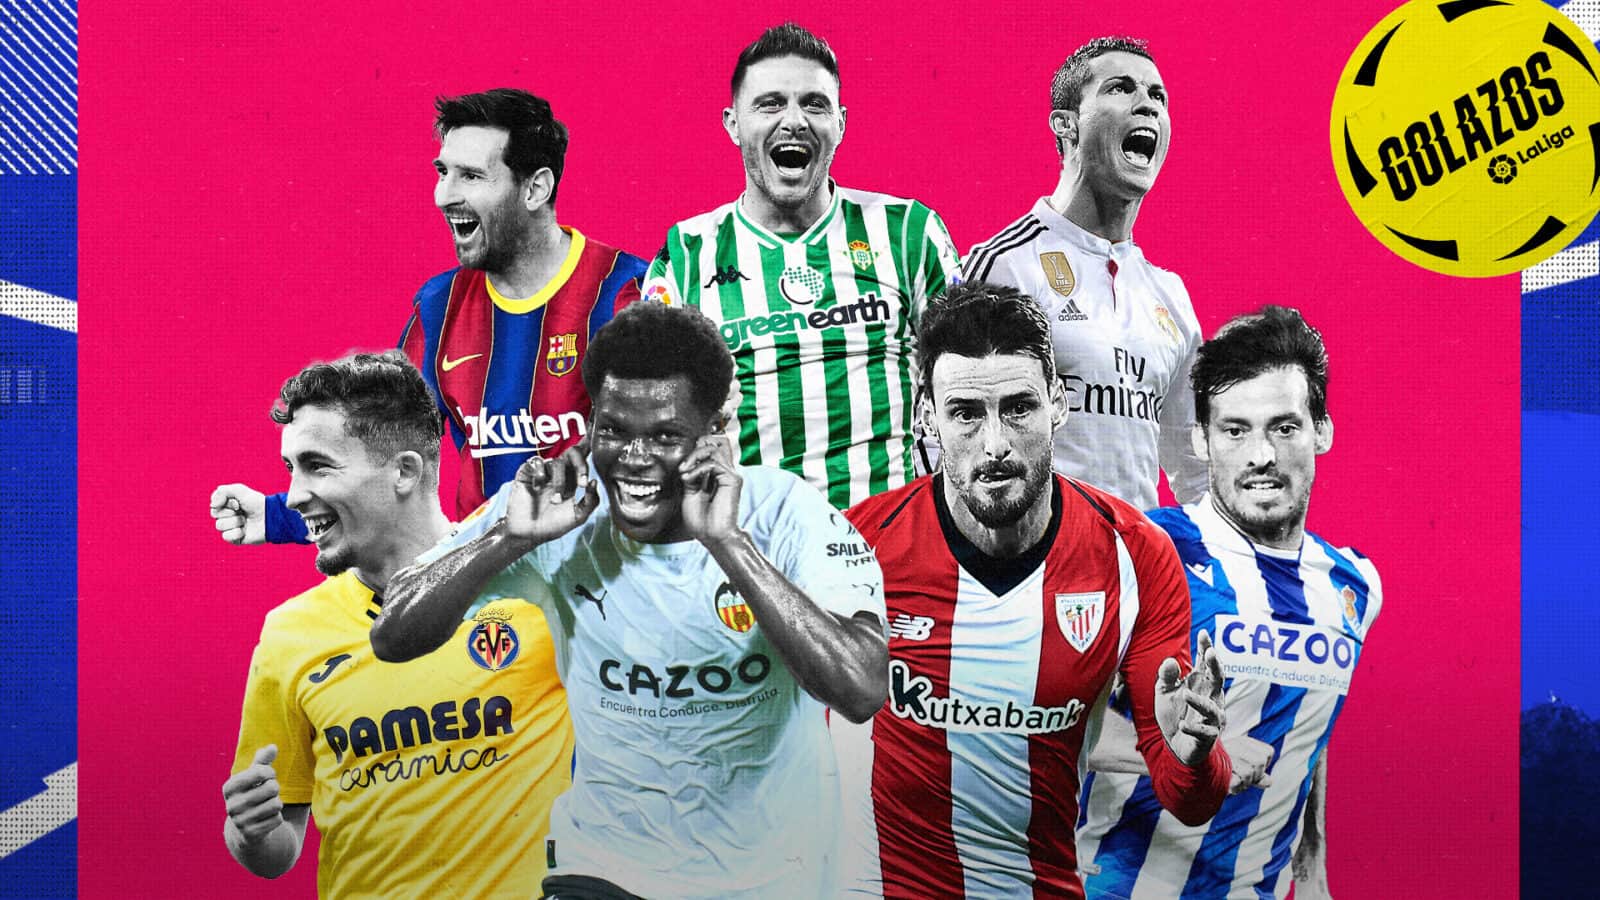 LaLiga Golazos is an officially-licensed digital collectibles platform built by the Spanish LaLiga and the creators of NBA Top Shot, Dapper Labs.